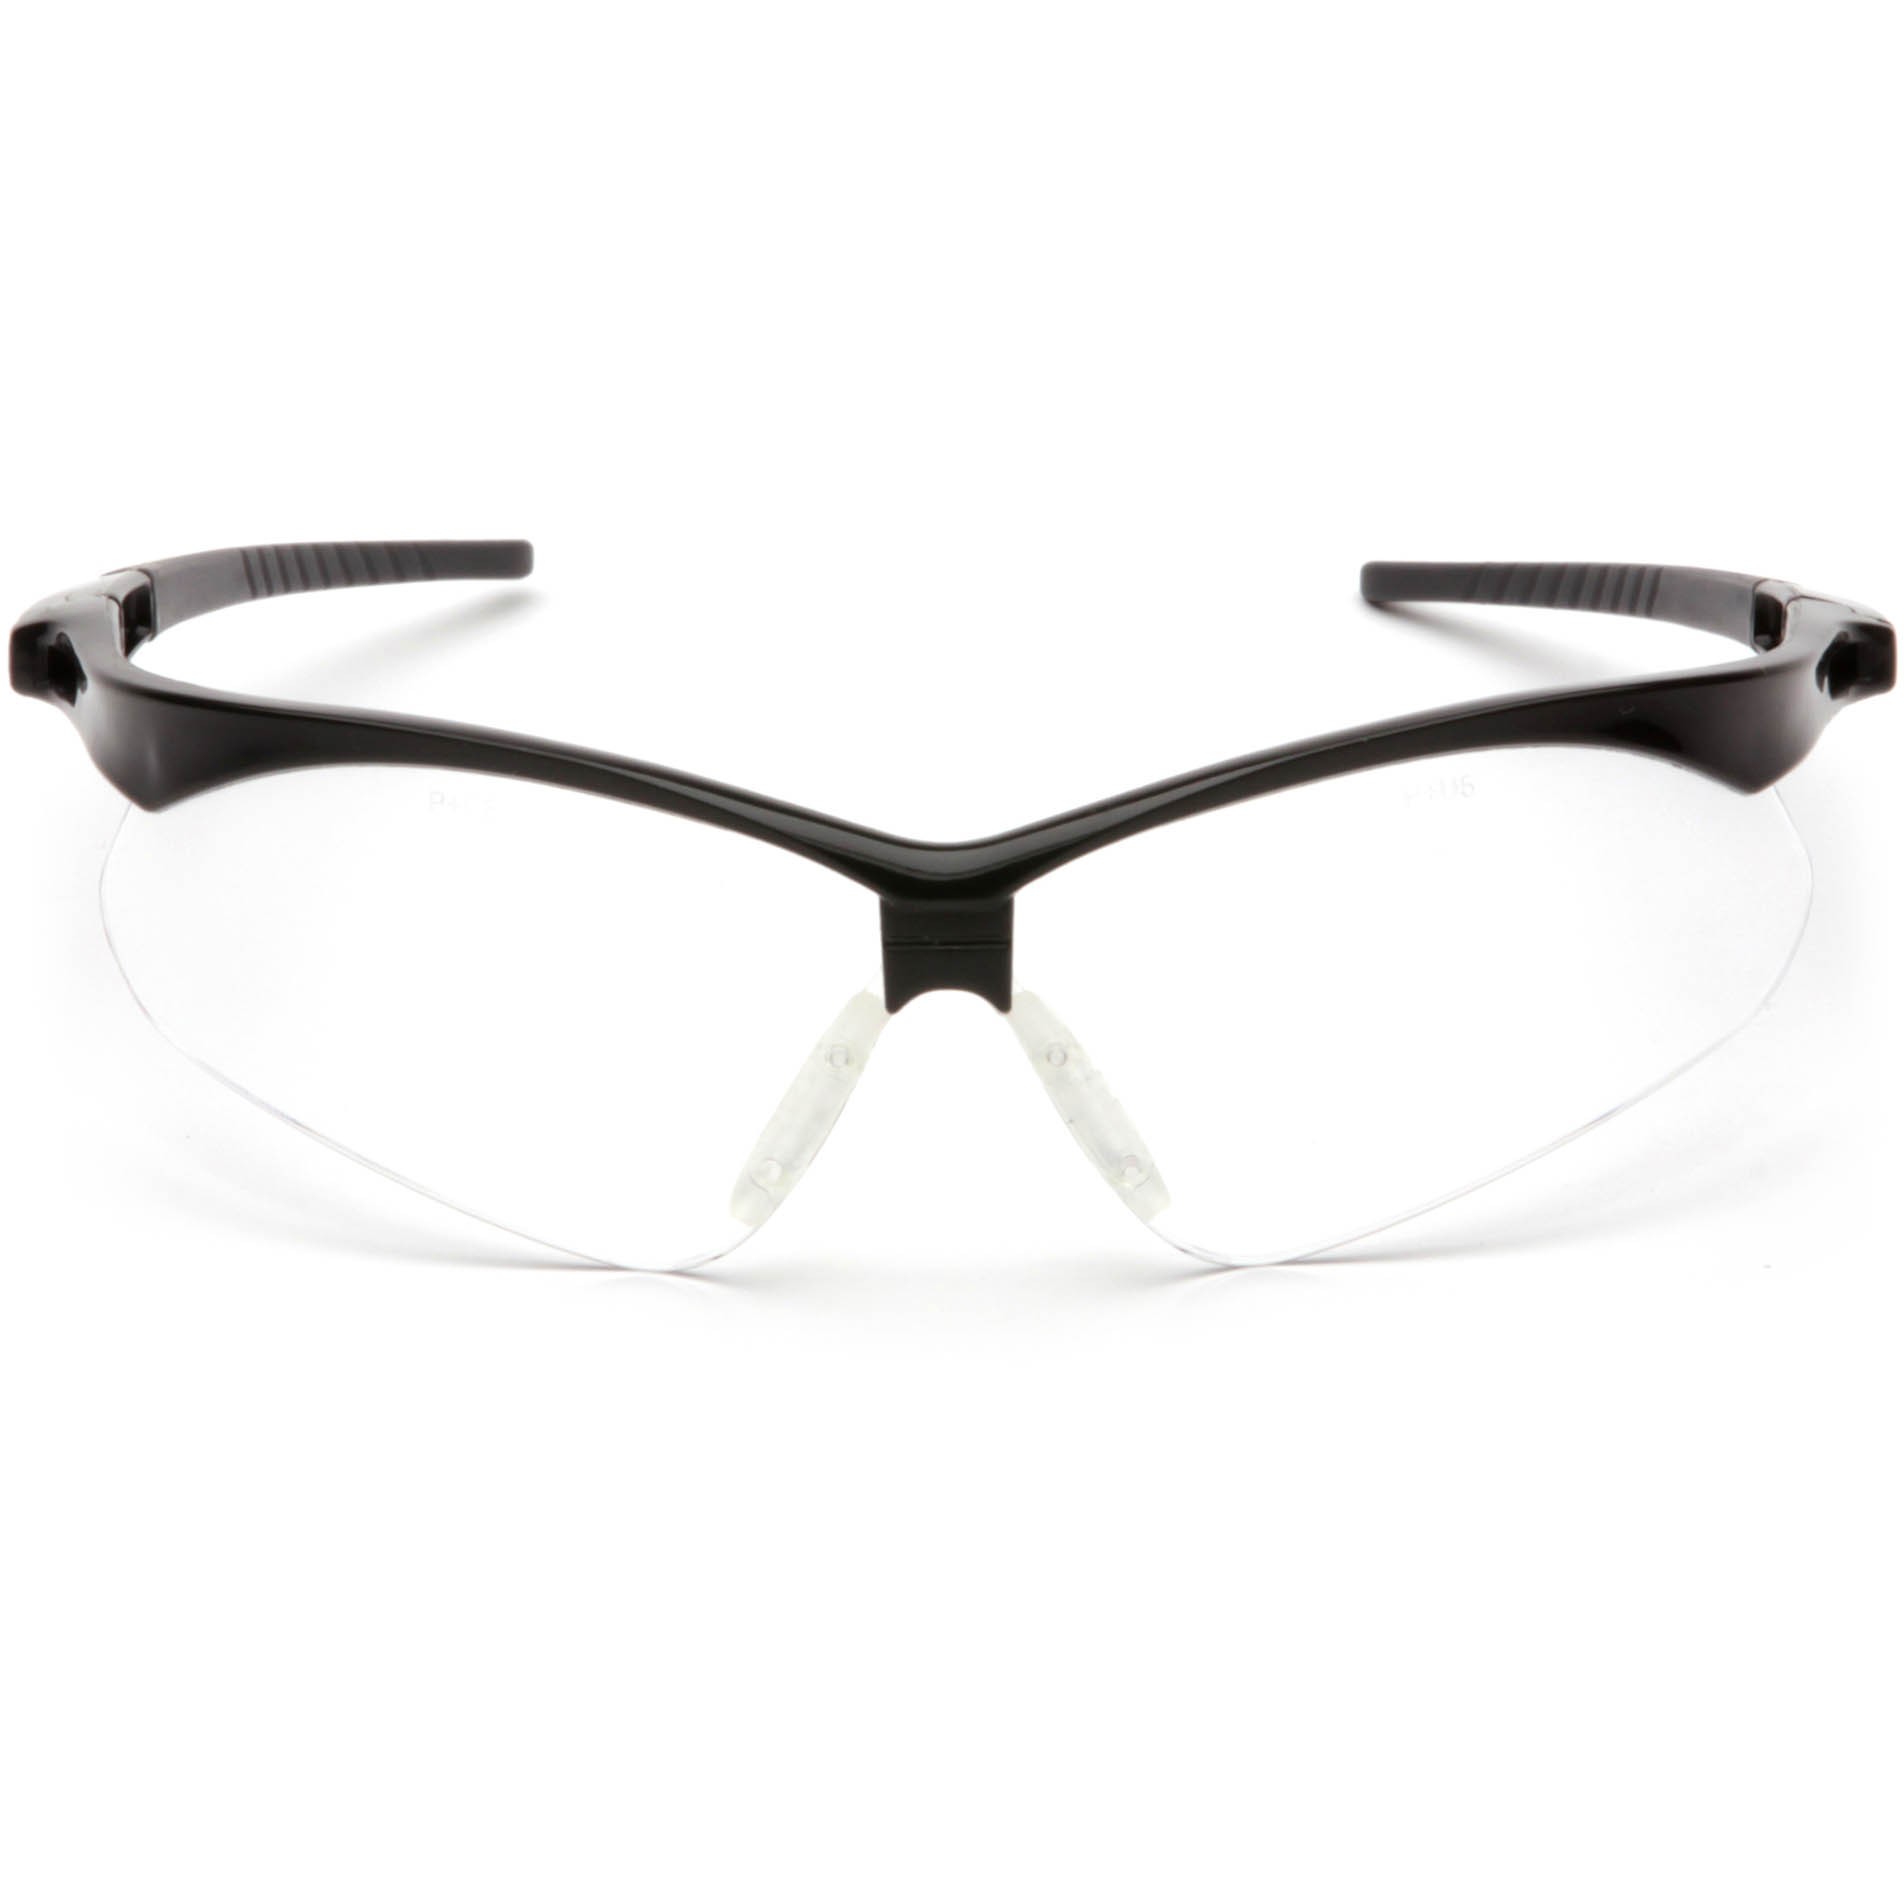 Pyramex PMXTREME Safety Glasses Clear Lens/Black Frame with Cord